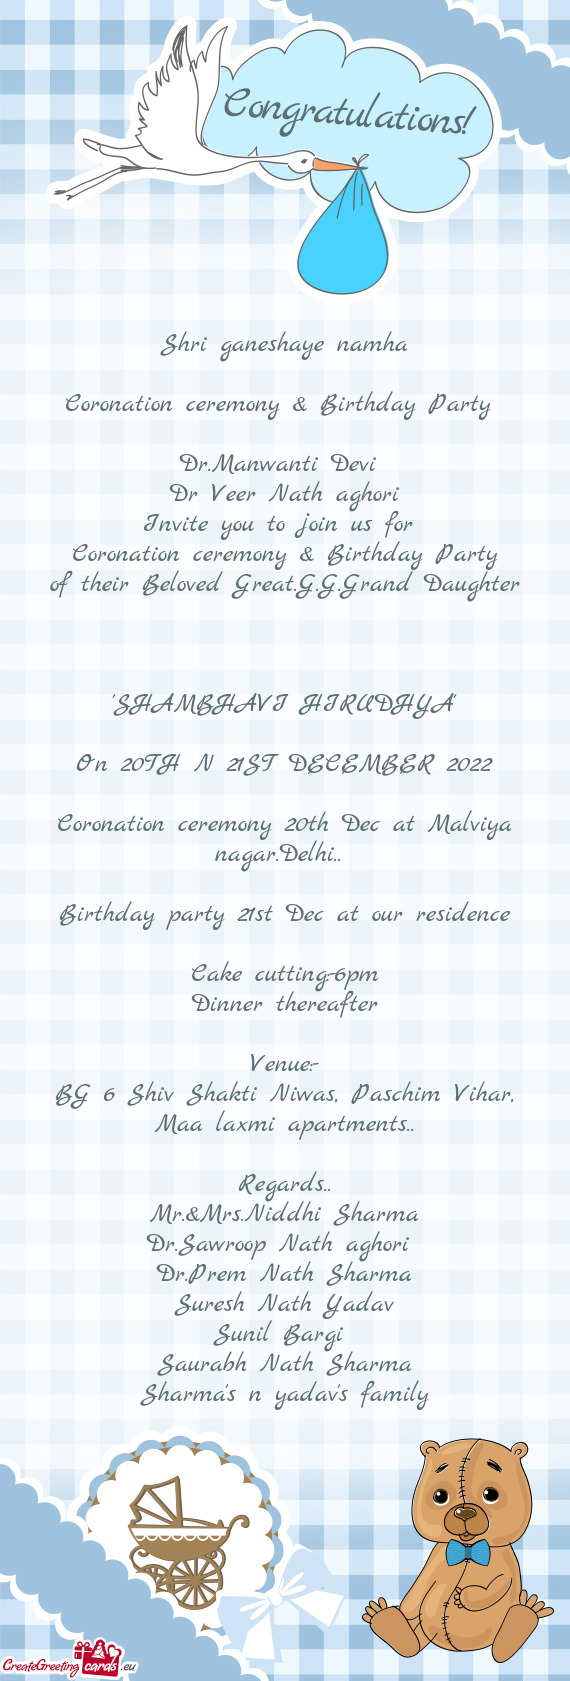 Birthday party 21st Dec at our residence